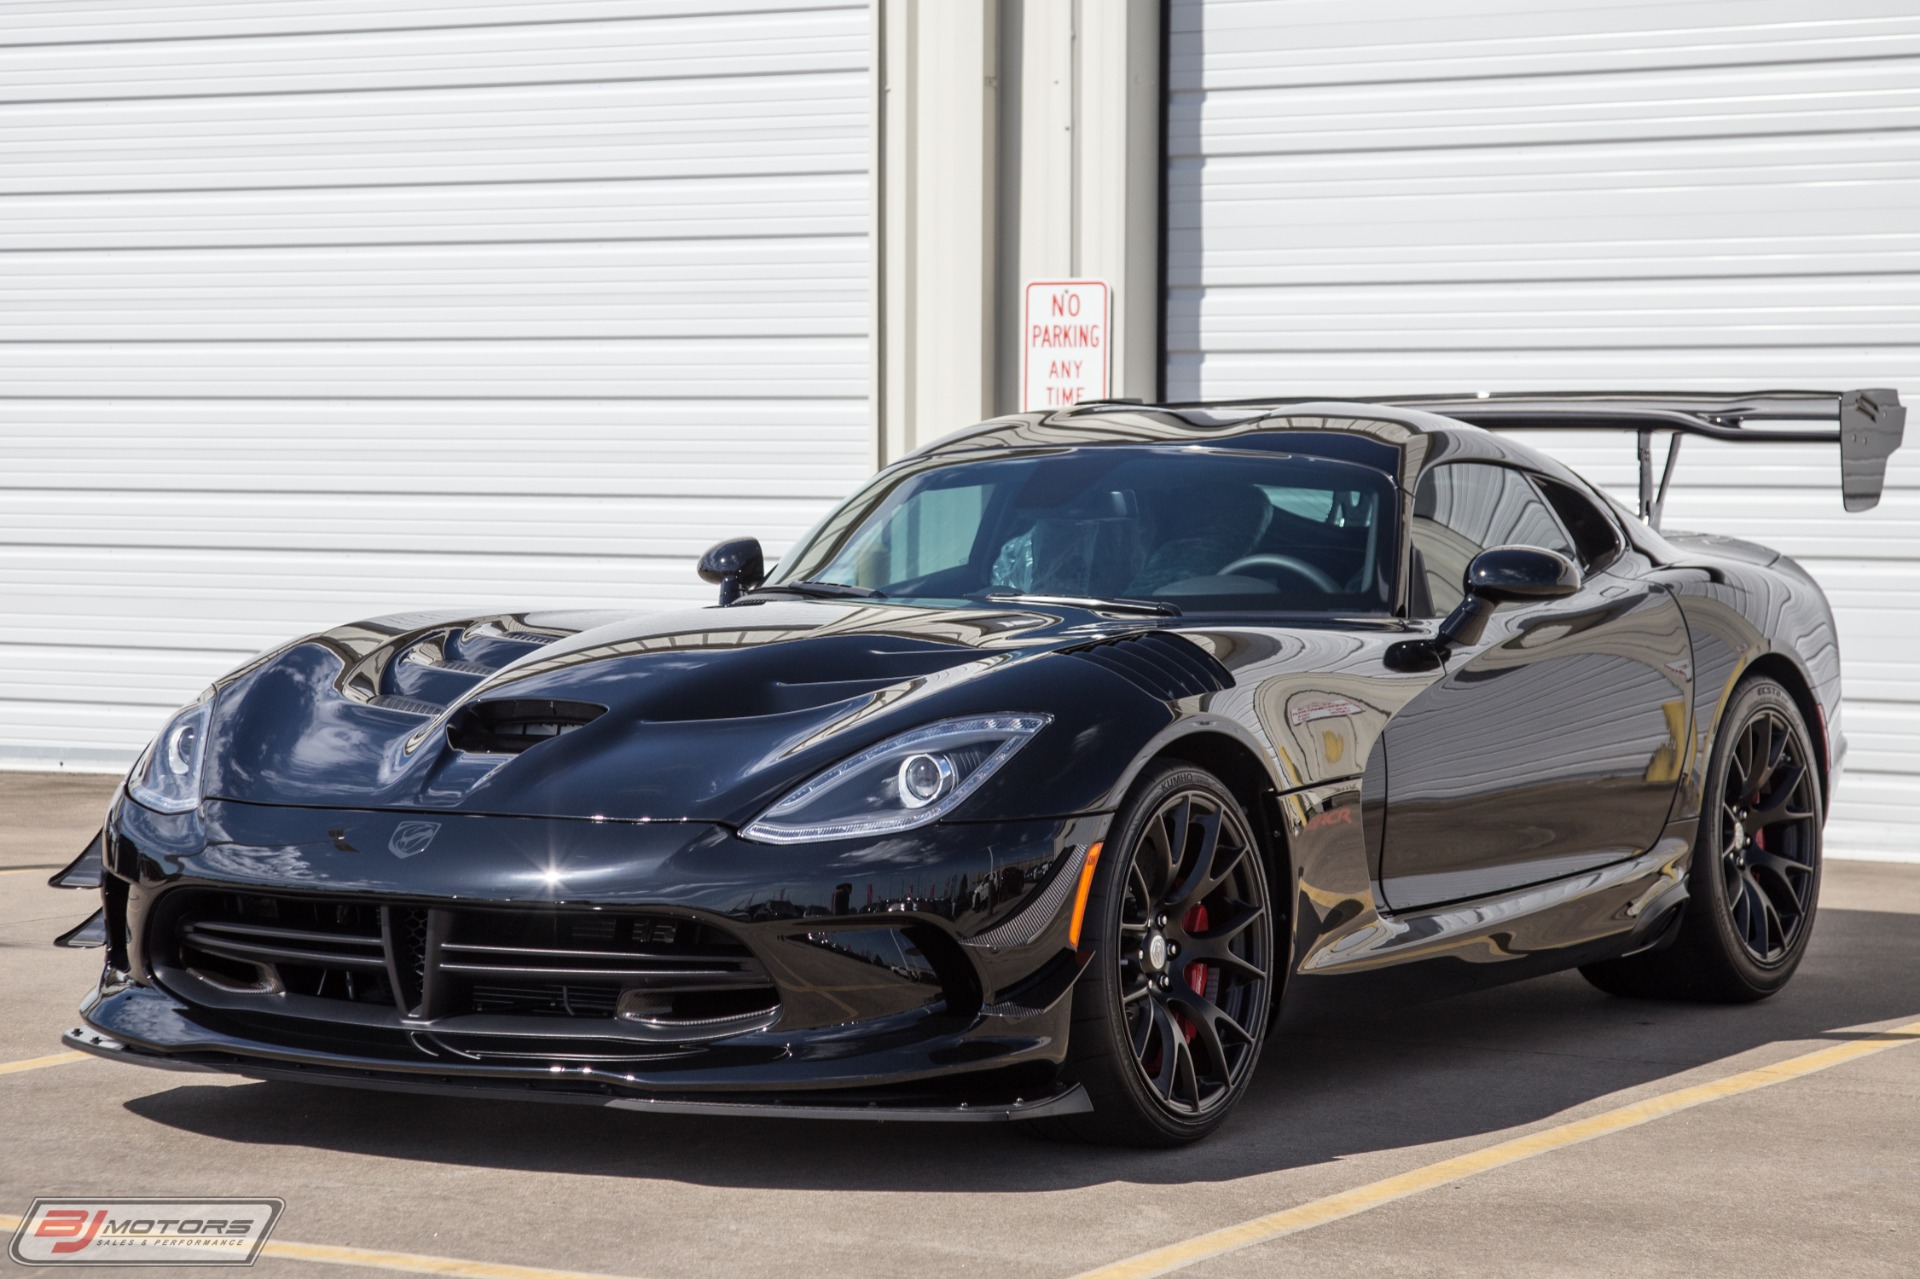 Used 17 Dodge Viper Acr Extreme For Sale Special Pricing Bj Motors Stock Hv